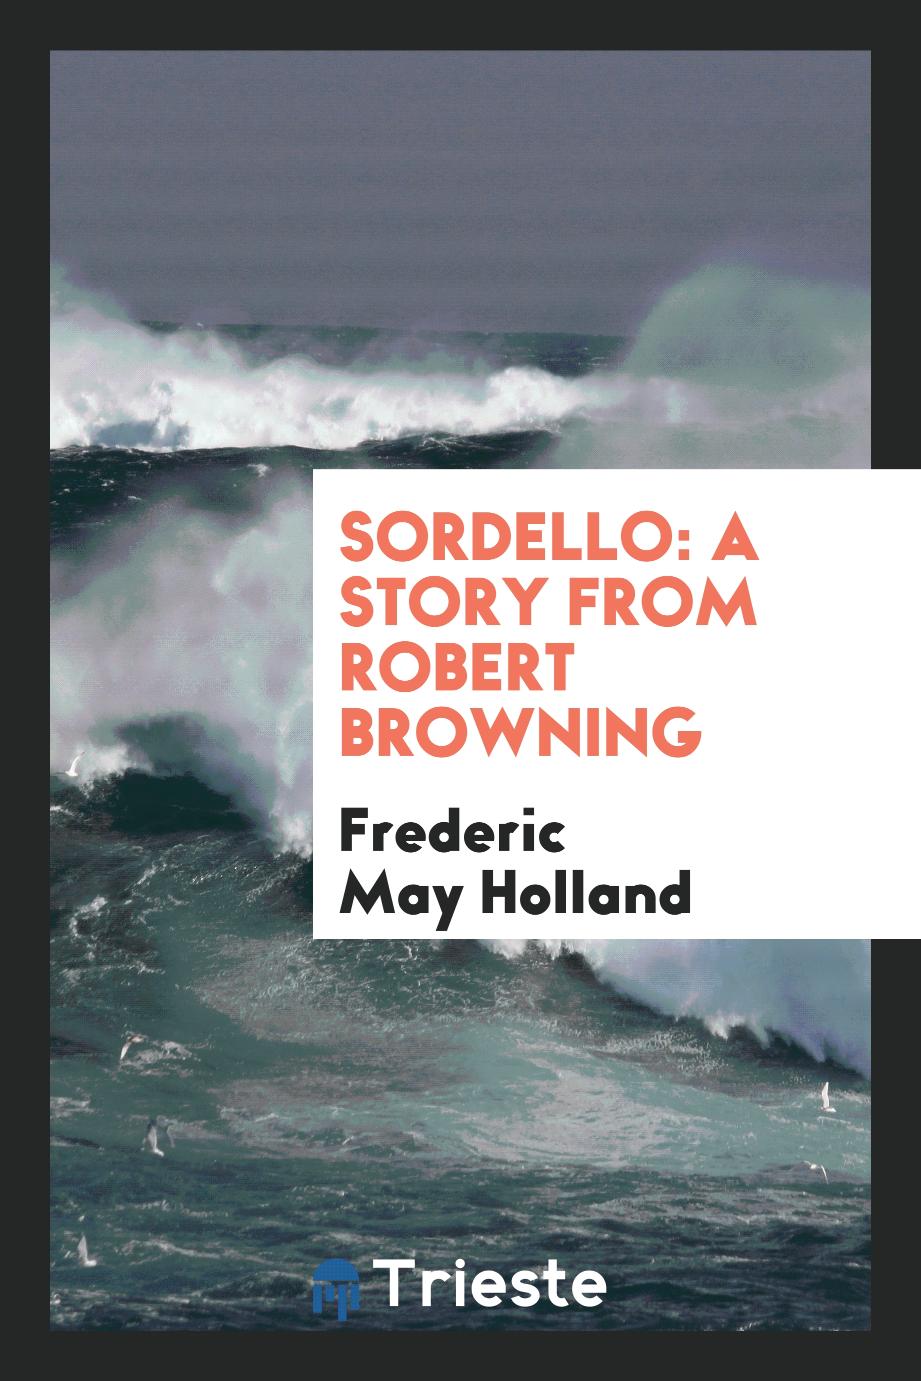 Sordello: A Story from Robert Browning